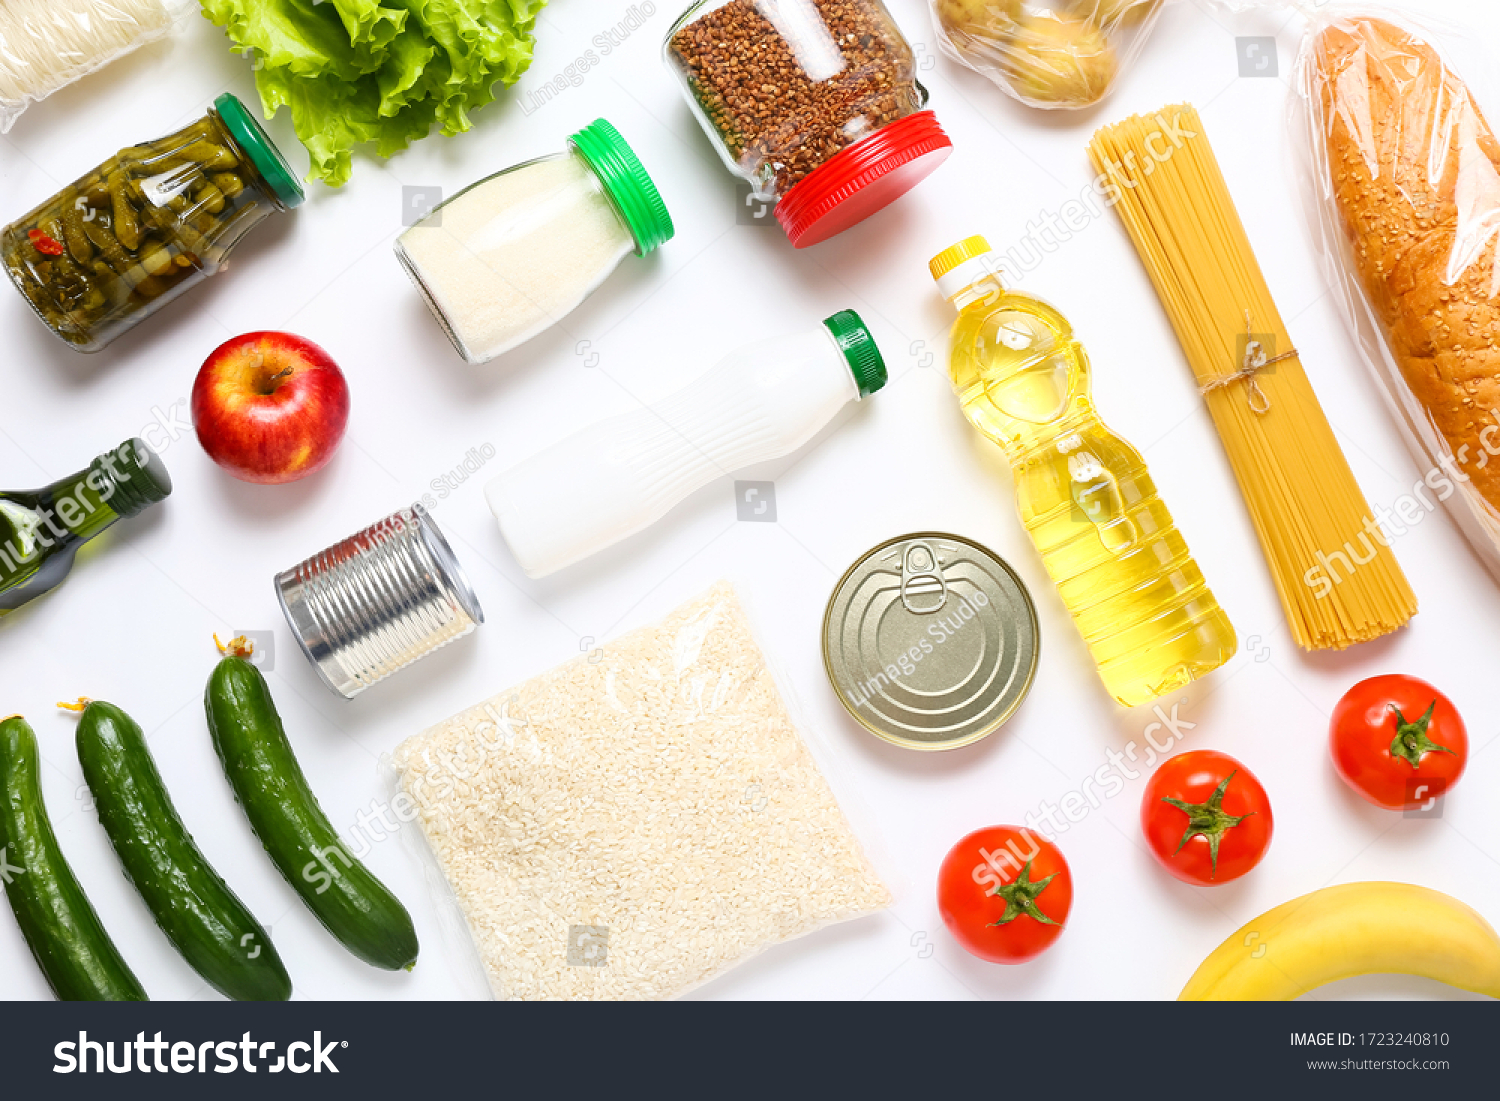 Food supplies for the period of quarantine on white background. Set of grocery items from canned food, vegetables, pasta, cereal. Food delivery concept. Donation concept. Top view. #1723240810